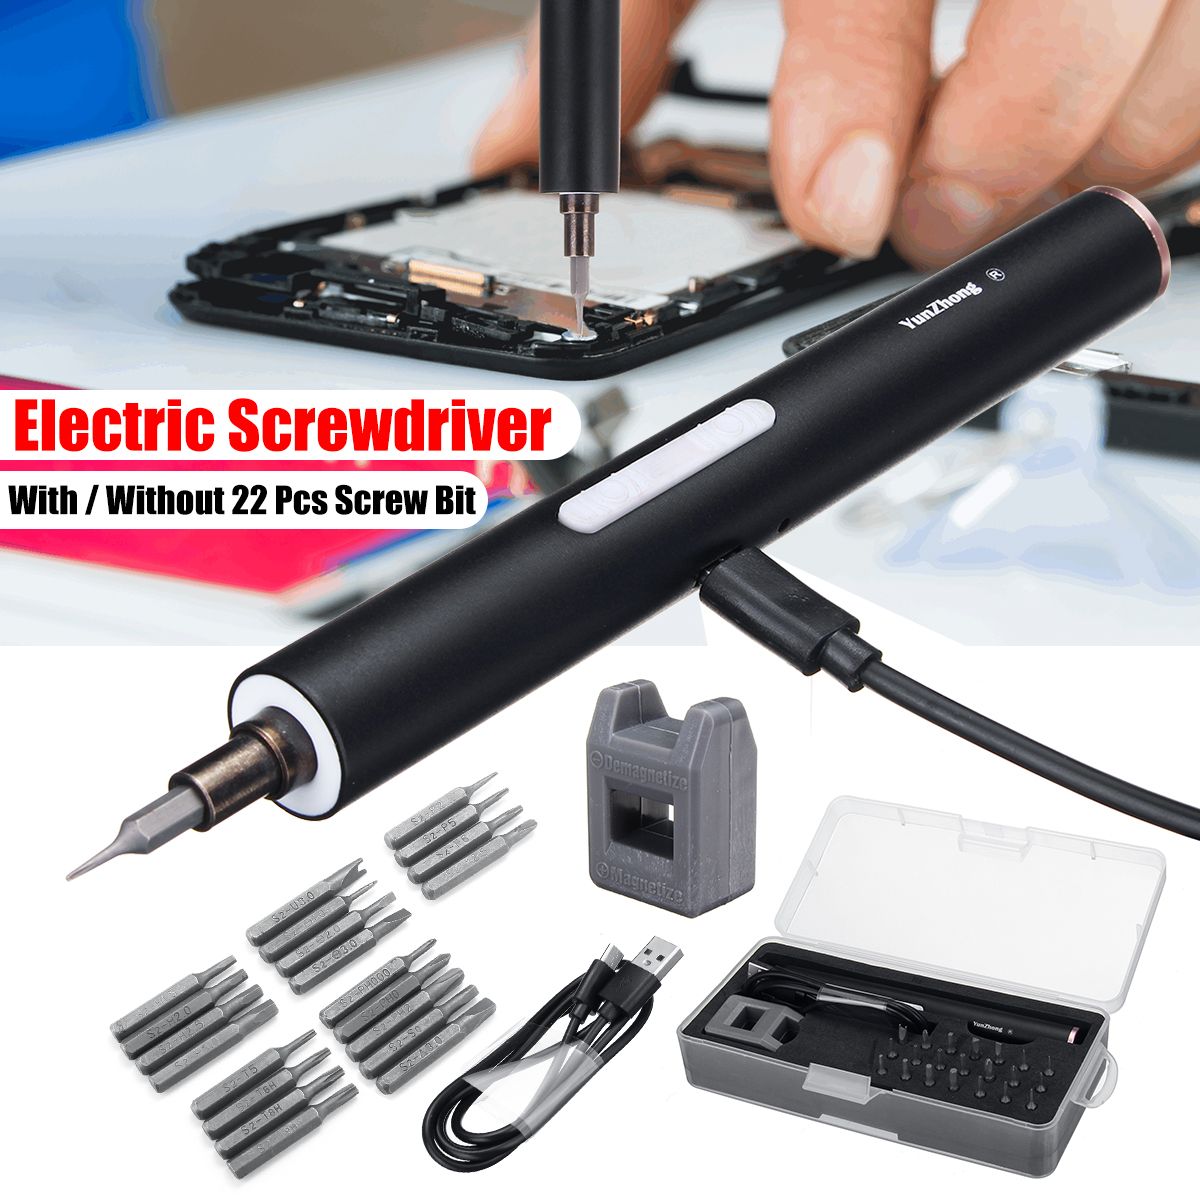 36V-Cordless-Electric-Screwdriver-Power-Tools-800mAh-Rechargeable-Lithium-Battery-Mini-Portable-USB--1465236